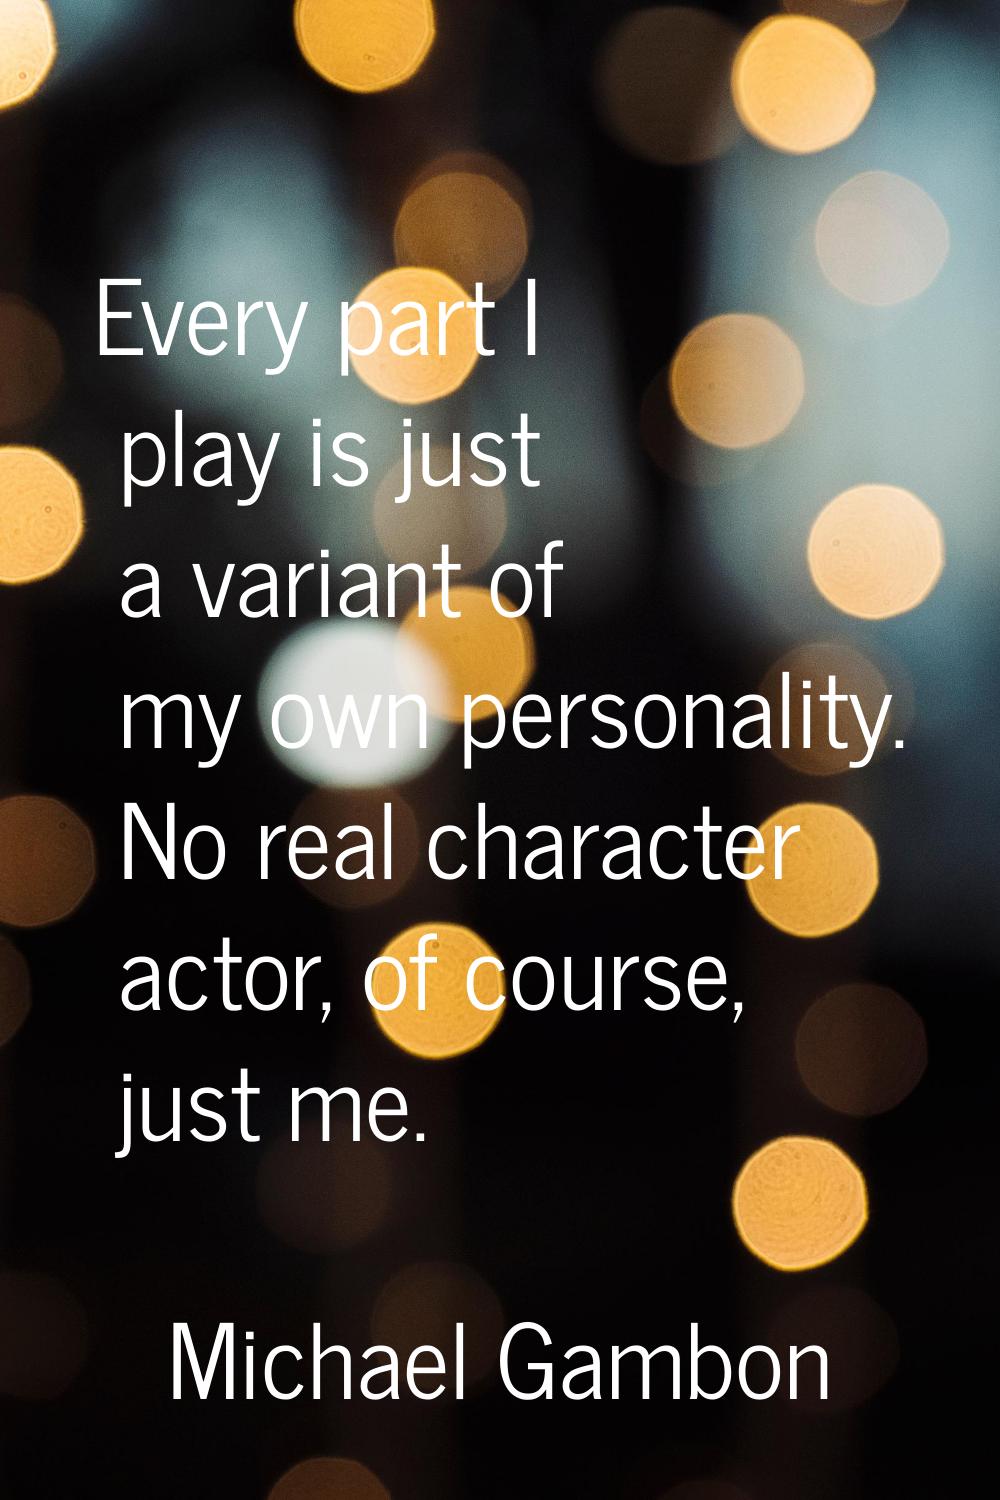 Every part I play is just a variant of my own personality. No real character actor, of course, just